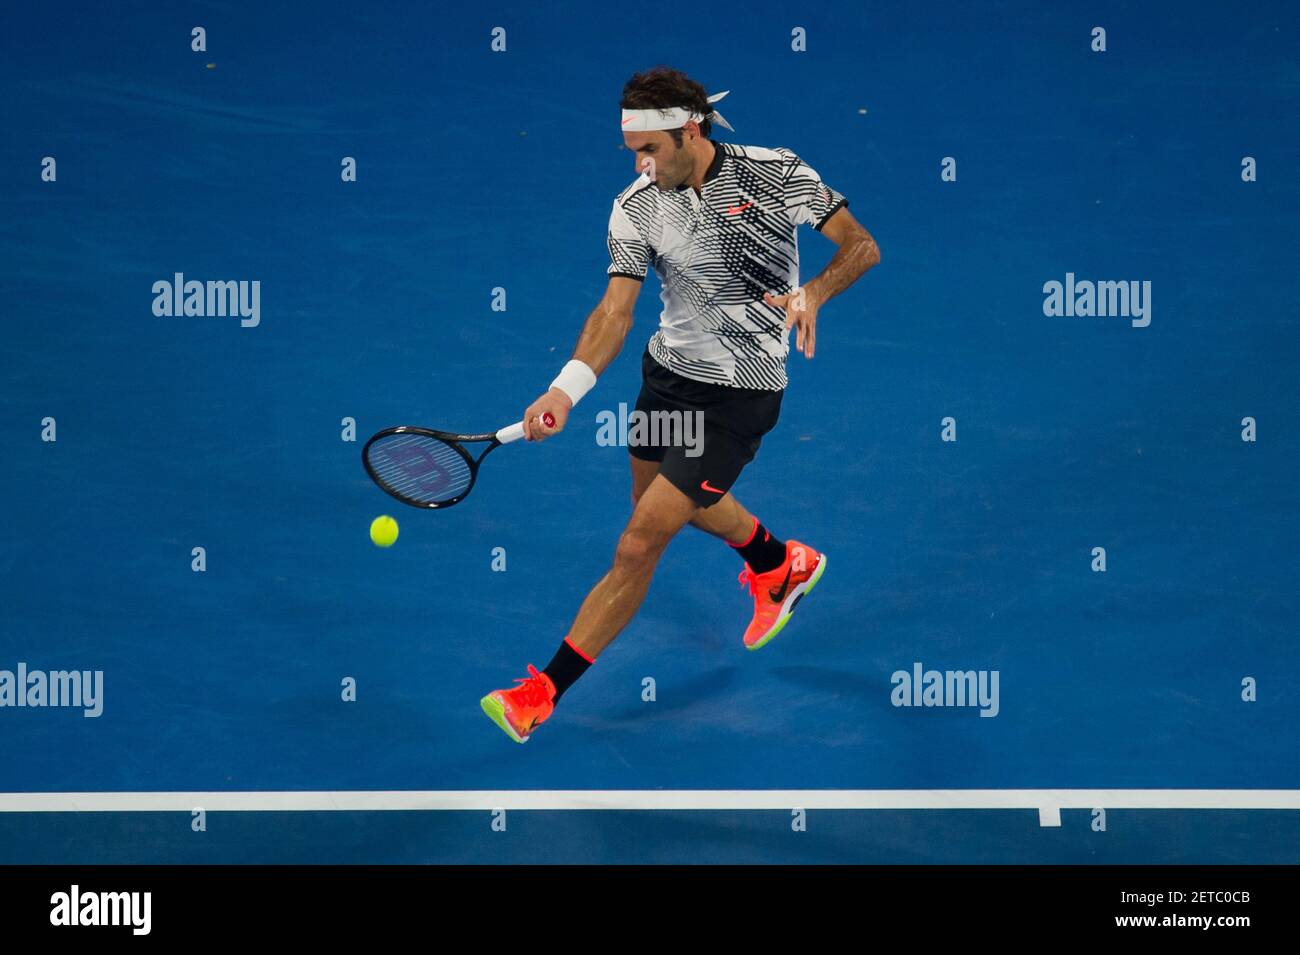 170116) -- MELBOURNE, Jan. 16, 2017 (Xinhua) -- Roger Federer of  Switzerland hits the ball during the men's singles first-round match  against Jurgen Melzer of Austria at the Australian Open Tennis Championships